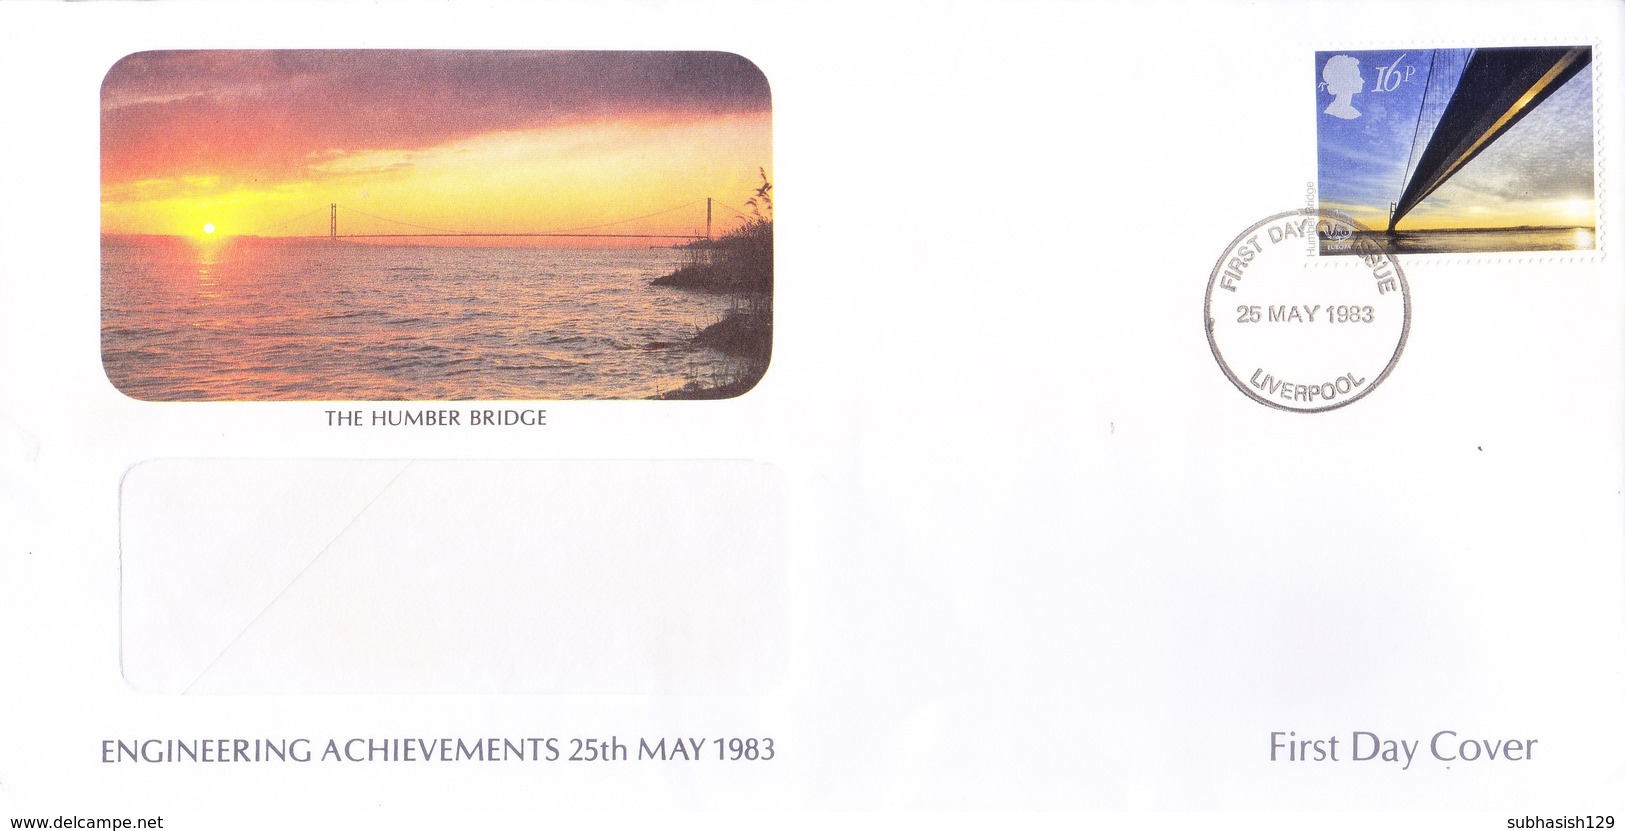 GREAT BRITAIN WINDOW FIRST DAY COVER - 25.05.1983 - THE HUMBER BRIDGE, ENGINEERING ACHIEVEMENTS - Covers & Documents